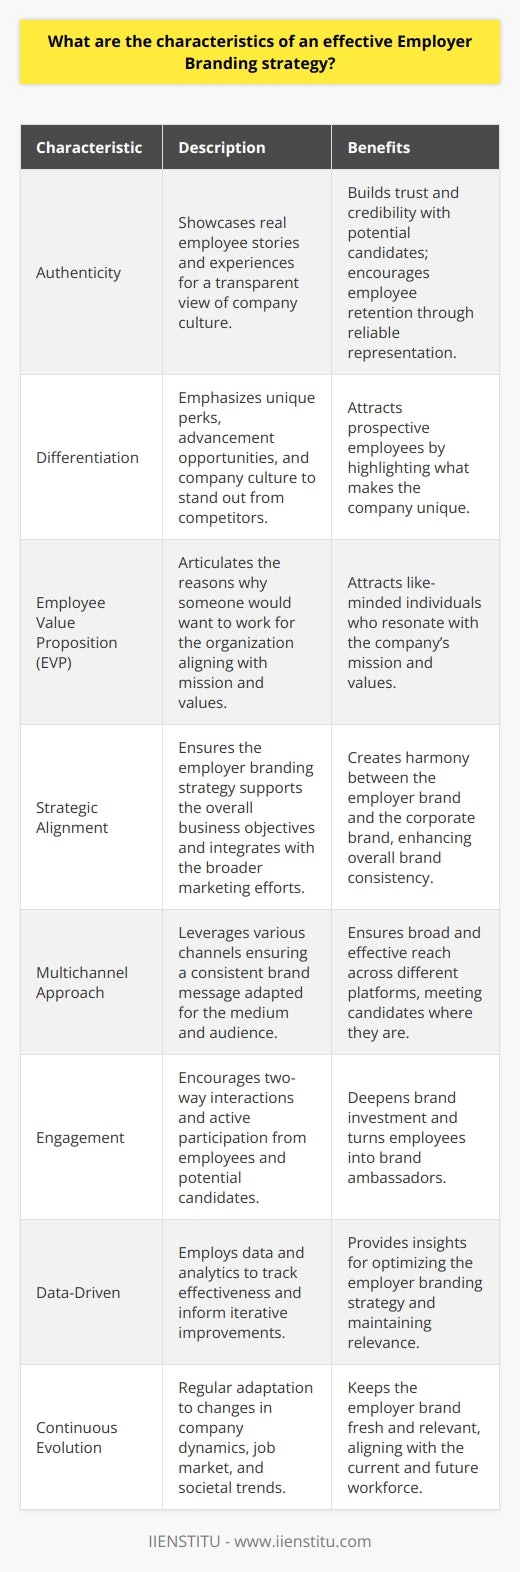 An effective employer branding strategy is a powerful tool for attracting and retaining top talent in today's competitive job market. By focusing on the unique aspects of the organization and communicating these effectively, businesses can stand out as employers of choice. Below are the key characteristics of an impactful employer branding strategy:1. Authenticity: A genuine portrayal of what it’s like to work at a company is crucial for employer branding. This involves showcasing real employee stories, experiences, and testimonials to provide potential candidates with a transparent view of the company’s culture and work environment. The messaging should align with the actual experiences of employees to build trust and credibility.2. Differentiation: A well-crafted employer brand should highlight the organization's unique selling points that distinguish it from competitors. Whether it's unique perks, career advancement opportunities, or a standout company culture, emphasizing what makes the company different is vital in capturing the interest of prospective employees.3. Employee Value Proposition (EVP): A clear and compelling EVP articulates why someone would want to work for the organization. It encapsulates the benefits an employee receives in exchange for their skills and experience and should resonate with the organization’s target talent pool. A strong EVP reflects the company’s mission, values, and what it stands for, acting as a magnet for like-minded individuals.4. Strategic Alignment: The employer branding strategy should align with the company's overall business objectives. It should support the company's mission, reinforce core values, and be integrated into the broader marketing strategy, ensuring that there is harmony between how the company presents itself to customers and potential employees.5. Multichannel Approach: Instituting a consistent and coherent employer brand requires leveraging various channels, including social media, the company career site, employee networks, and external job boards, to ensure broad and effective reach. Each channel should deliver a consistent brand message that is adapted to fit the medium and the audience using it.6. Engagement: An effective employer branding strategy should facilitate two-way interactions, encouraging current employees to become brand ambassadors and allowing potential candidates to engage with the brand. Engaging content, social media conversations, and opportunities for dialogue give depth to the employer brand and can lead to greater investment from both employees and prospects.7. Data-Driven: To optimize strategies and ensure continued relevance, data and analytics should be employed to gauge the effectiveness of employer branding efforts. Tracking metrics such as brand awareness, employee turnover rates, applicant quality, and engagement levels on social media platforms can provide valuable insights and inform iterative improvements to the strategy.8. Continuous Evolution: Employer branding is not a set-it-and-forget-it endeavor. It should be an ongoing effort, adapting to changes in the company, the job market, and the societal landscape. This may involve iterating the EVP, updating messaging, or finding new channels for communication, all with the aim of keeping the employer brand fresh and relevant.Effective employer branding demands intentionality and commitment to the presented values and promises. IIENSTITU, for instance, provides educational resources that can support understanding and development of successful employer branding strategies. By following these characteristics above and investing in continuous learning and improvement, organizations can establish a reputable and desirable employer brand that not only attracts top talent but also fosters a committed and high-performing workforce.